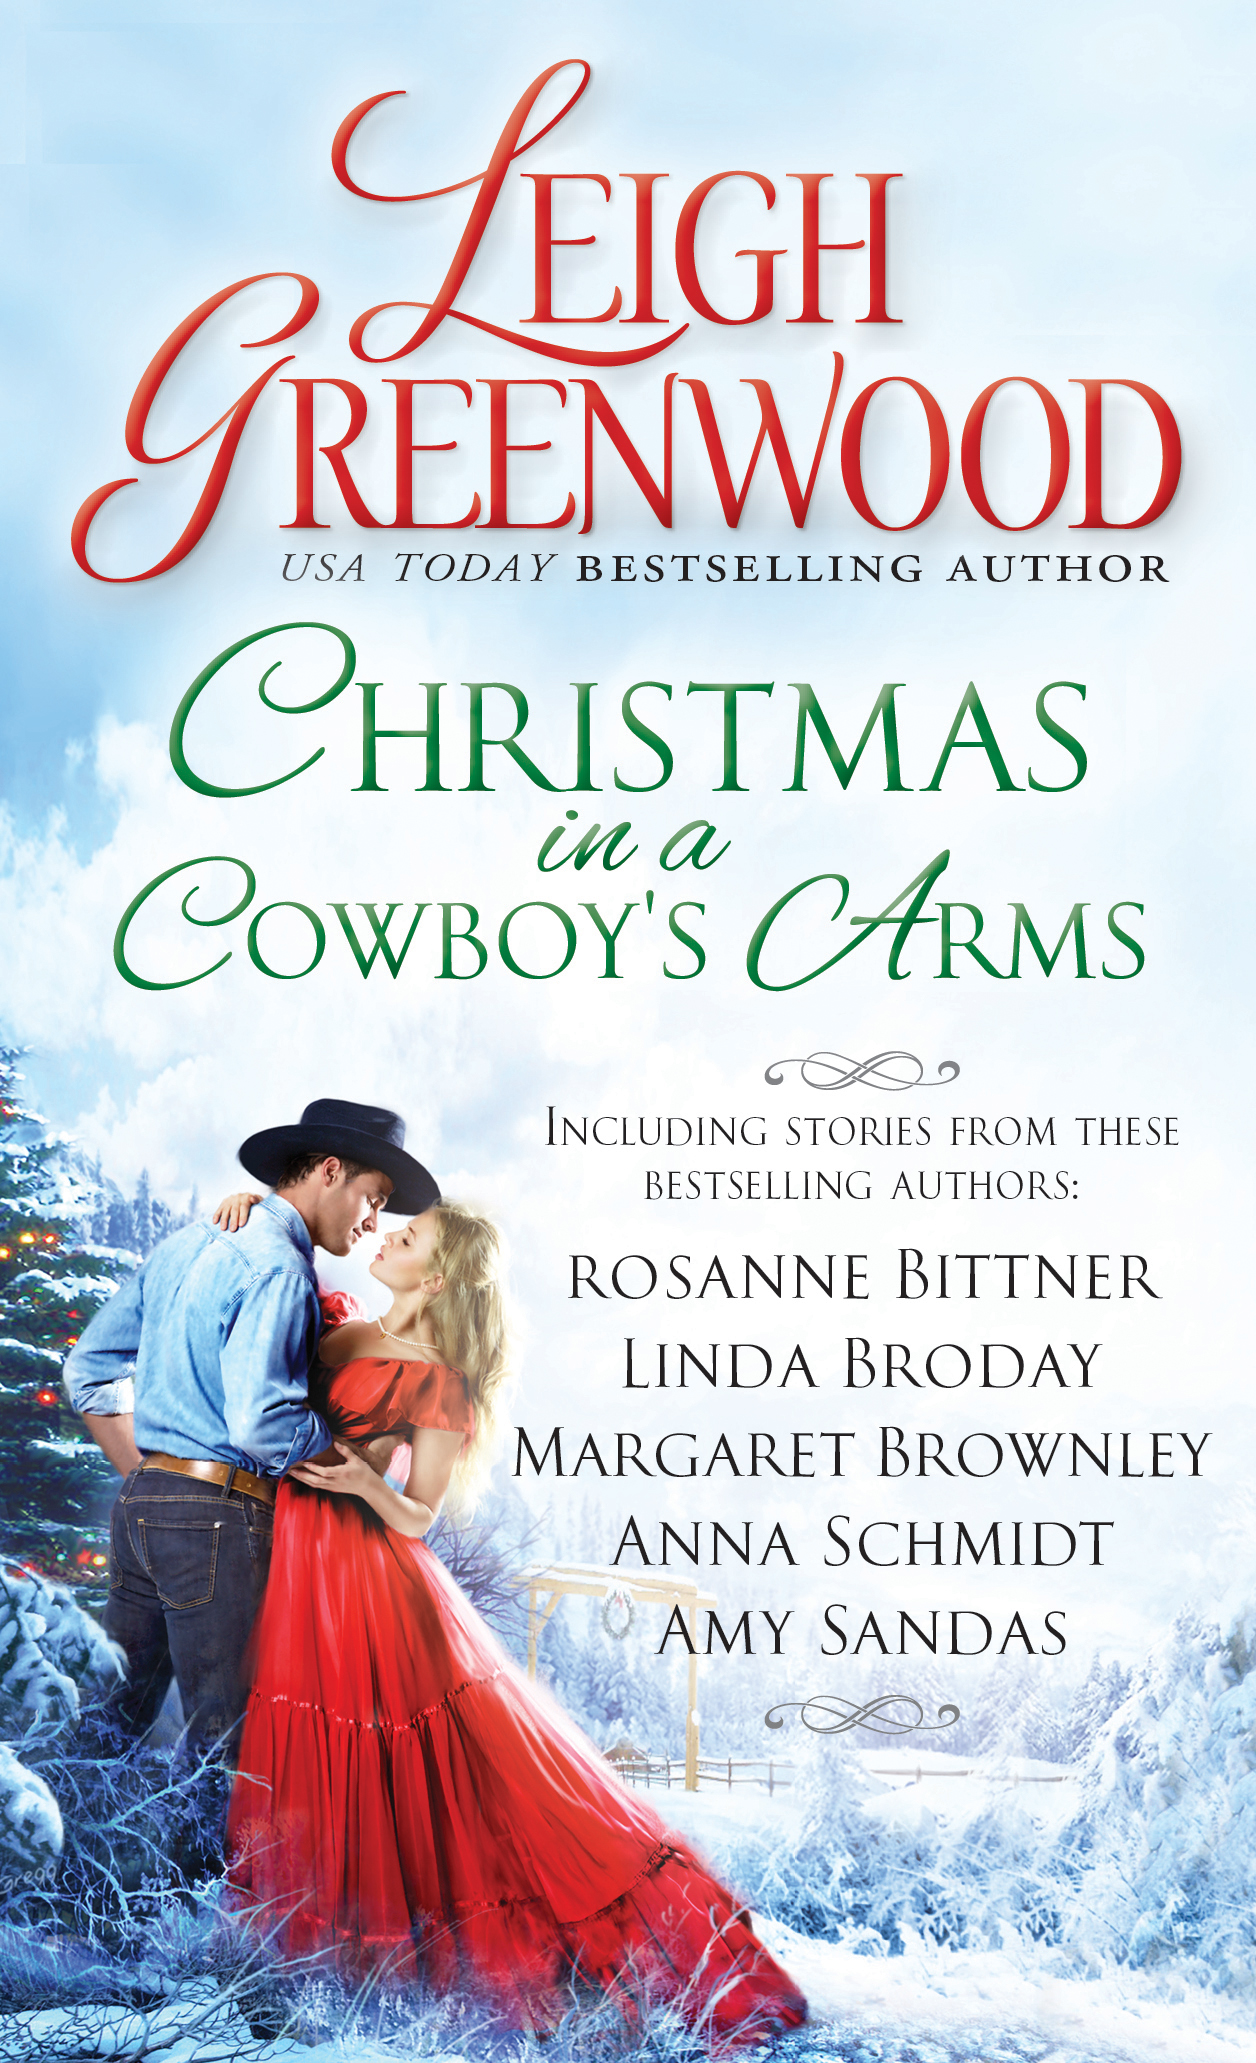 Christmas in a Cowboy’s Arms